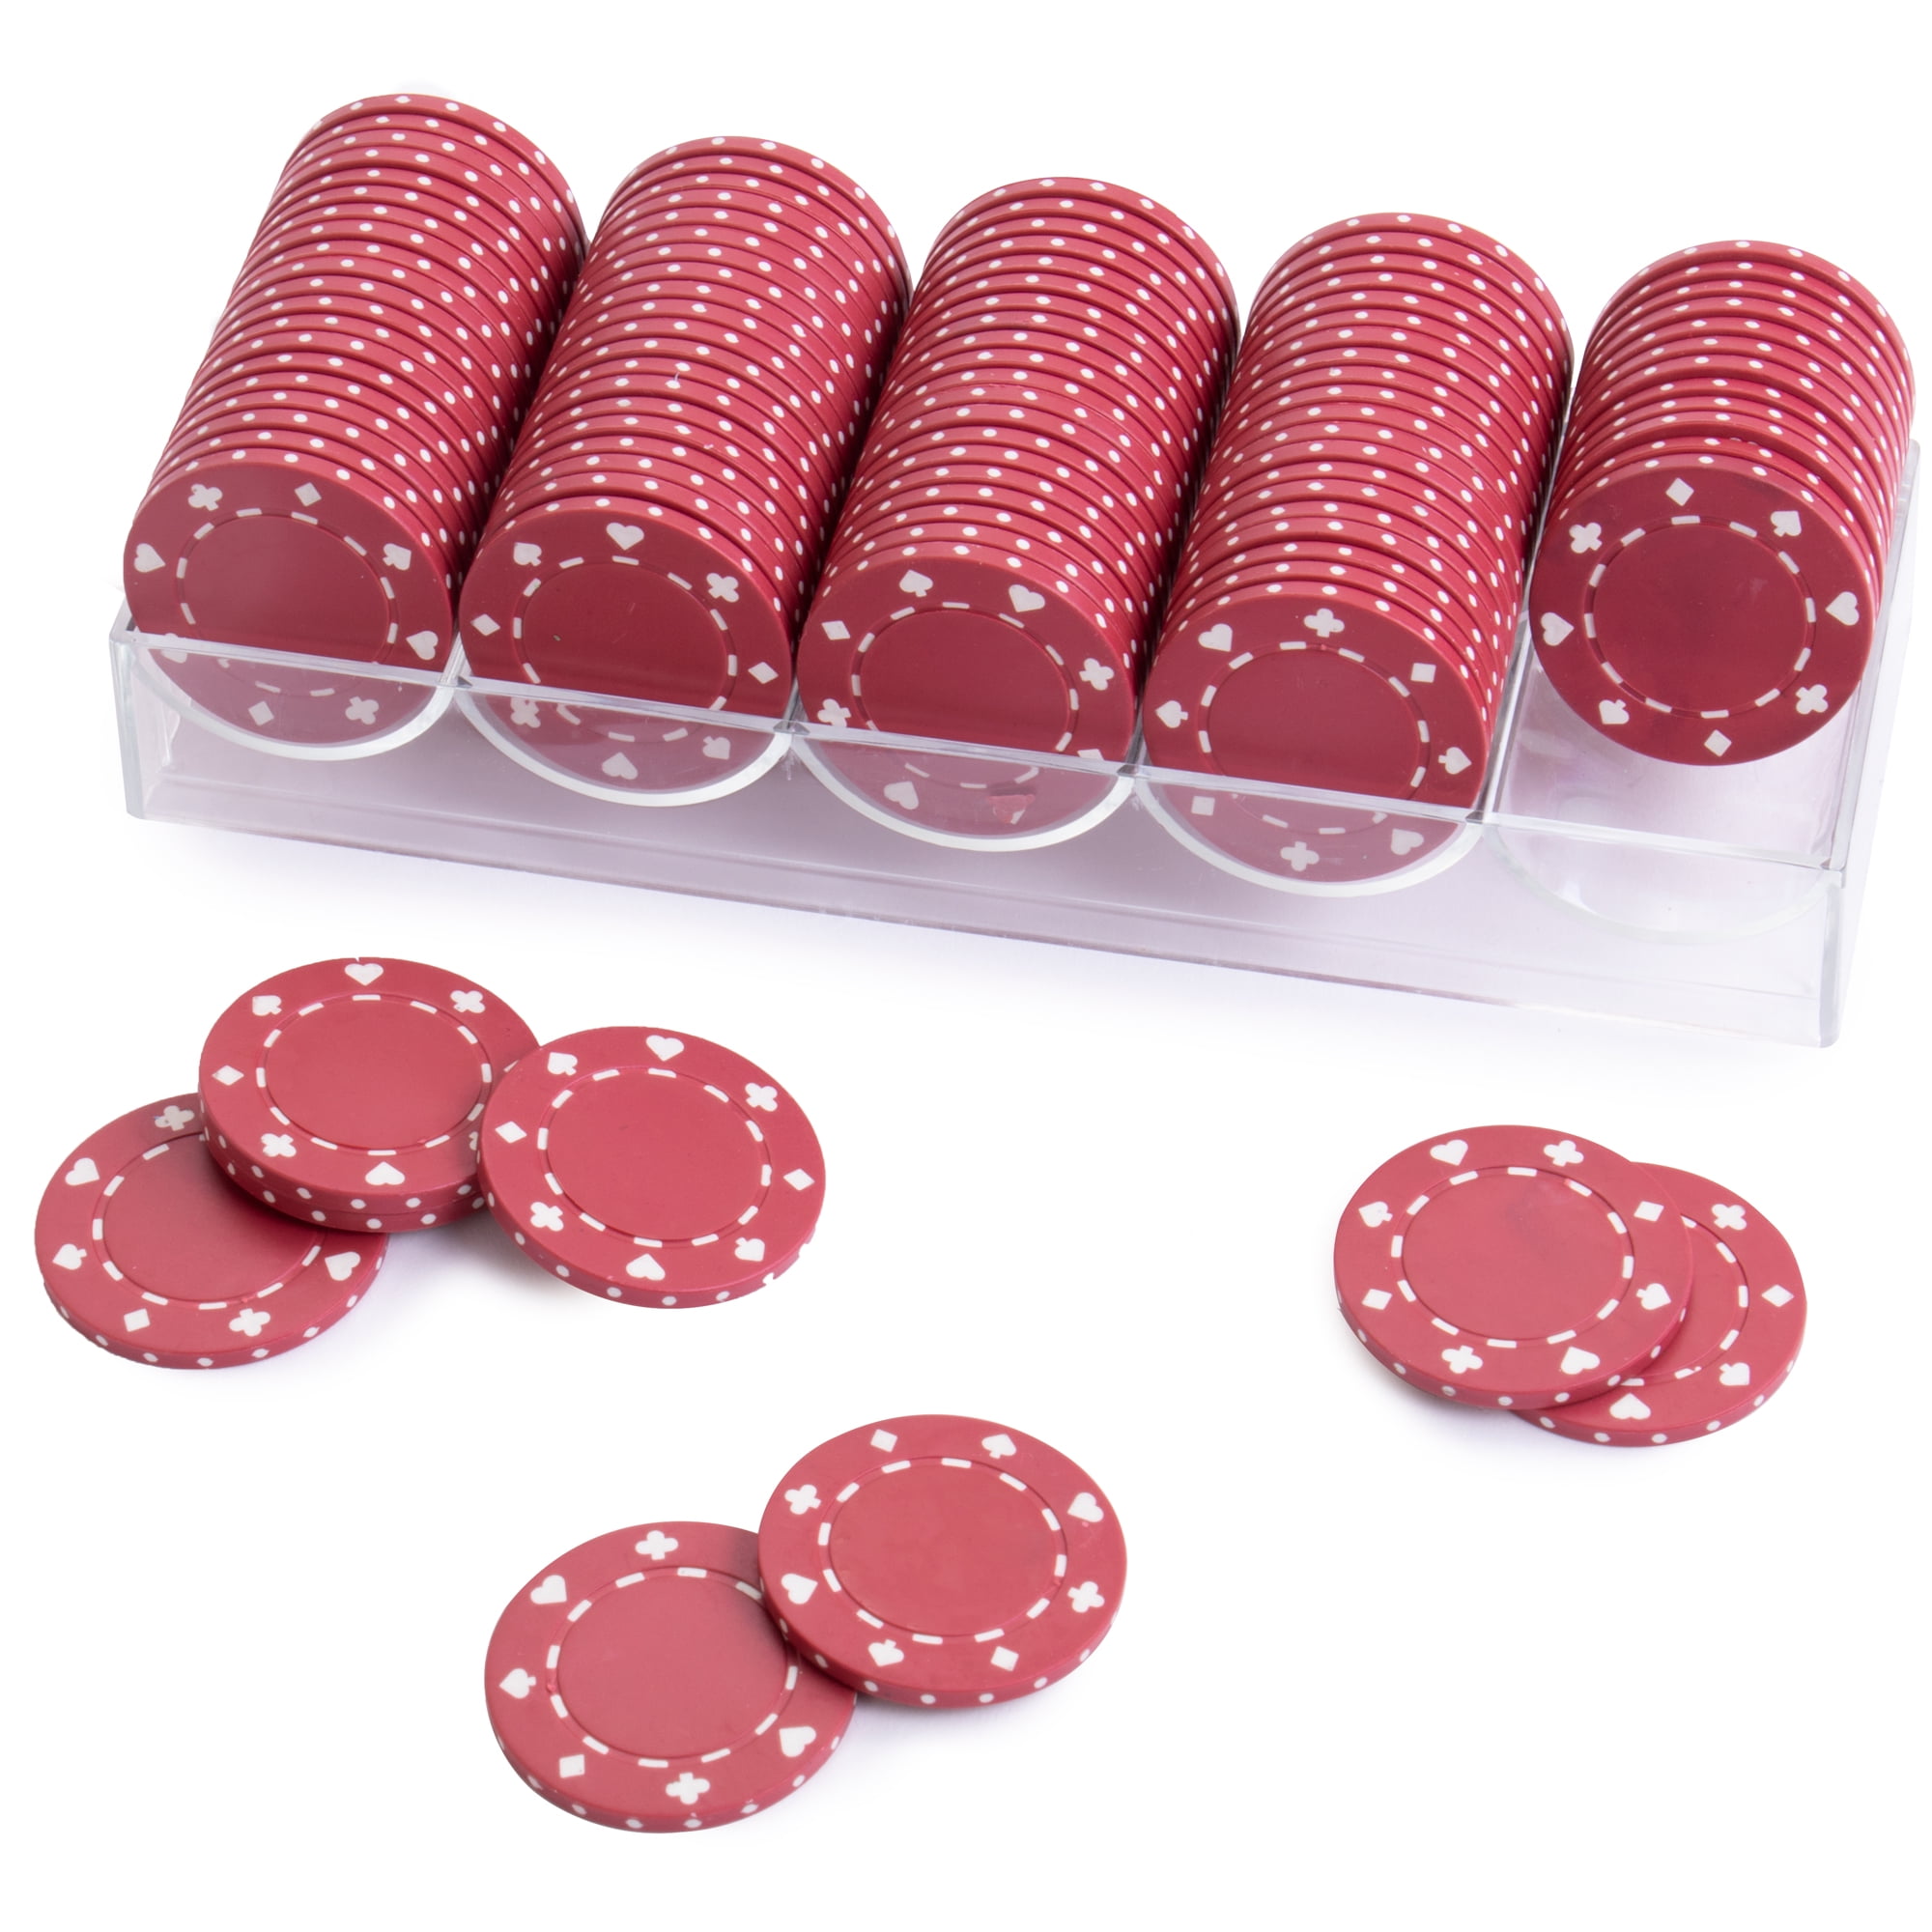 100 Clear Chip Spacers Casino Style Blackjack Poker Dealer Tray Free Shipping * 